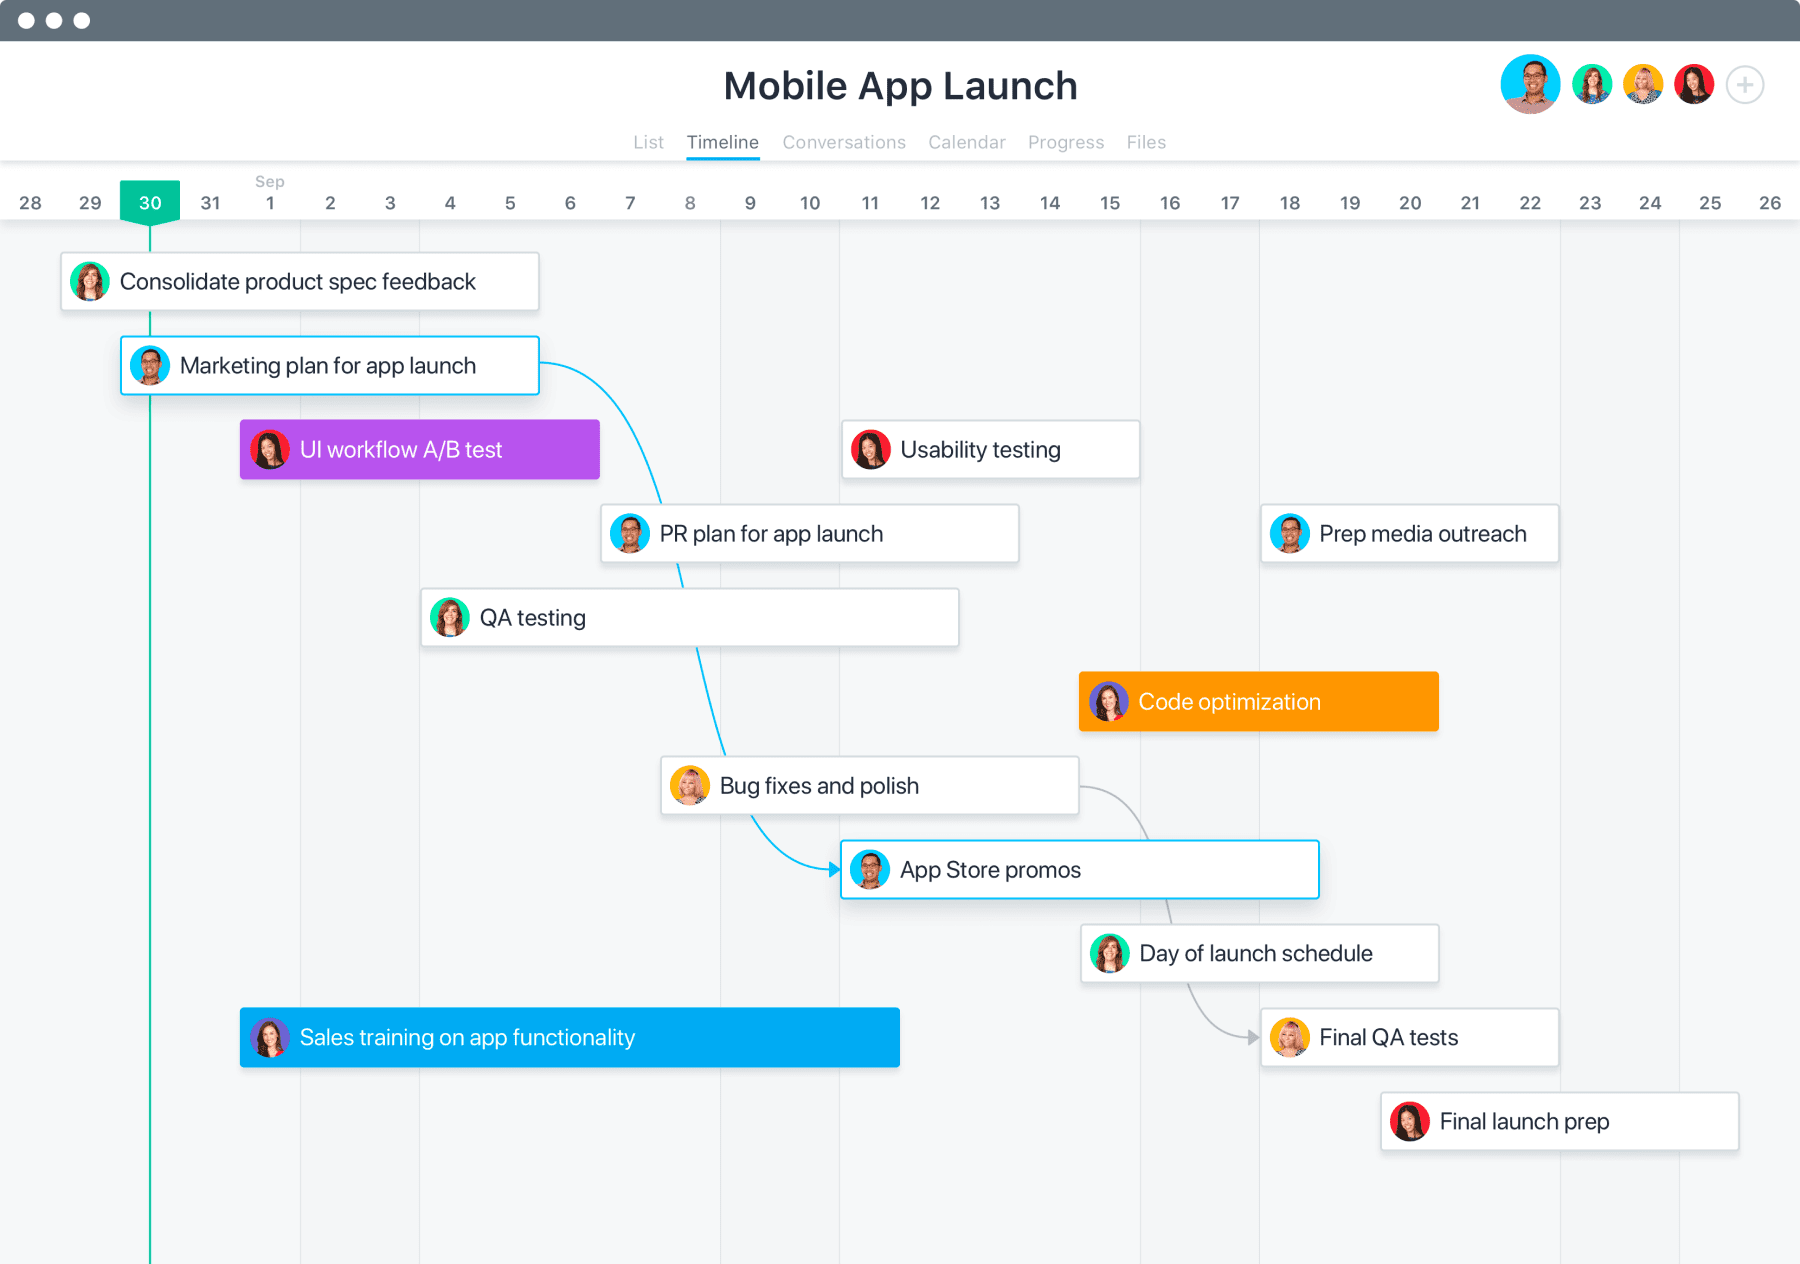 [Product UI] Mobile app launch (Timeline) 